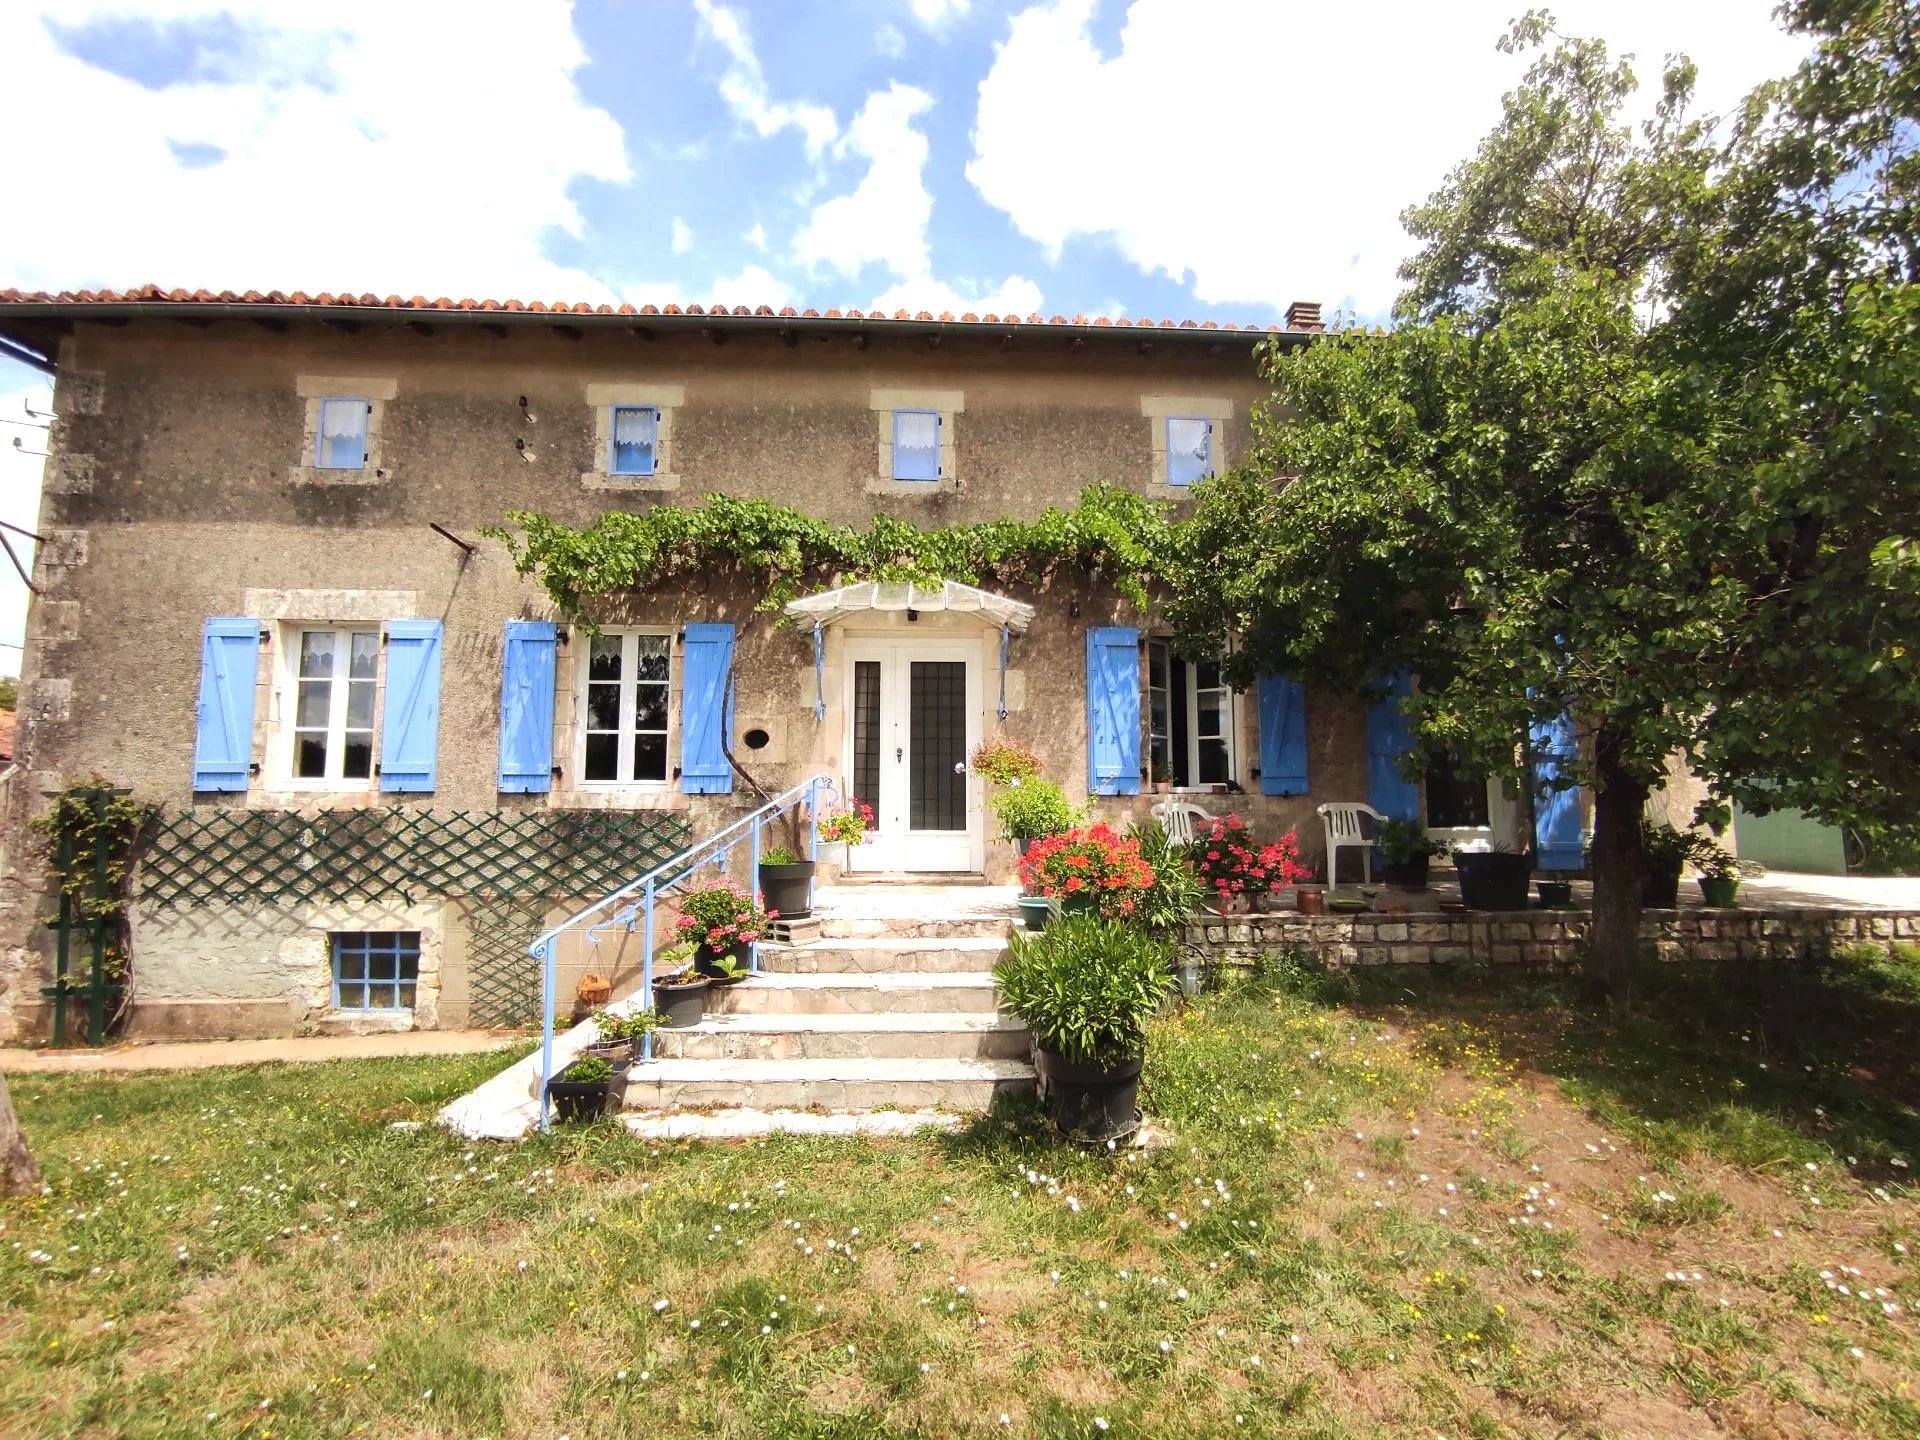 Magnificent 4-bedroom house in hamlet near Champagne Mouton